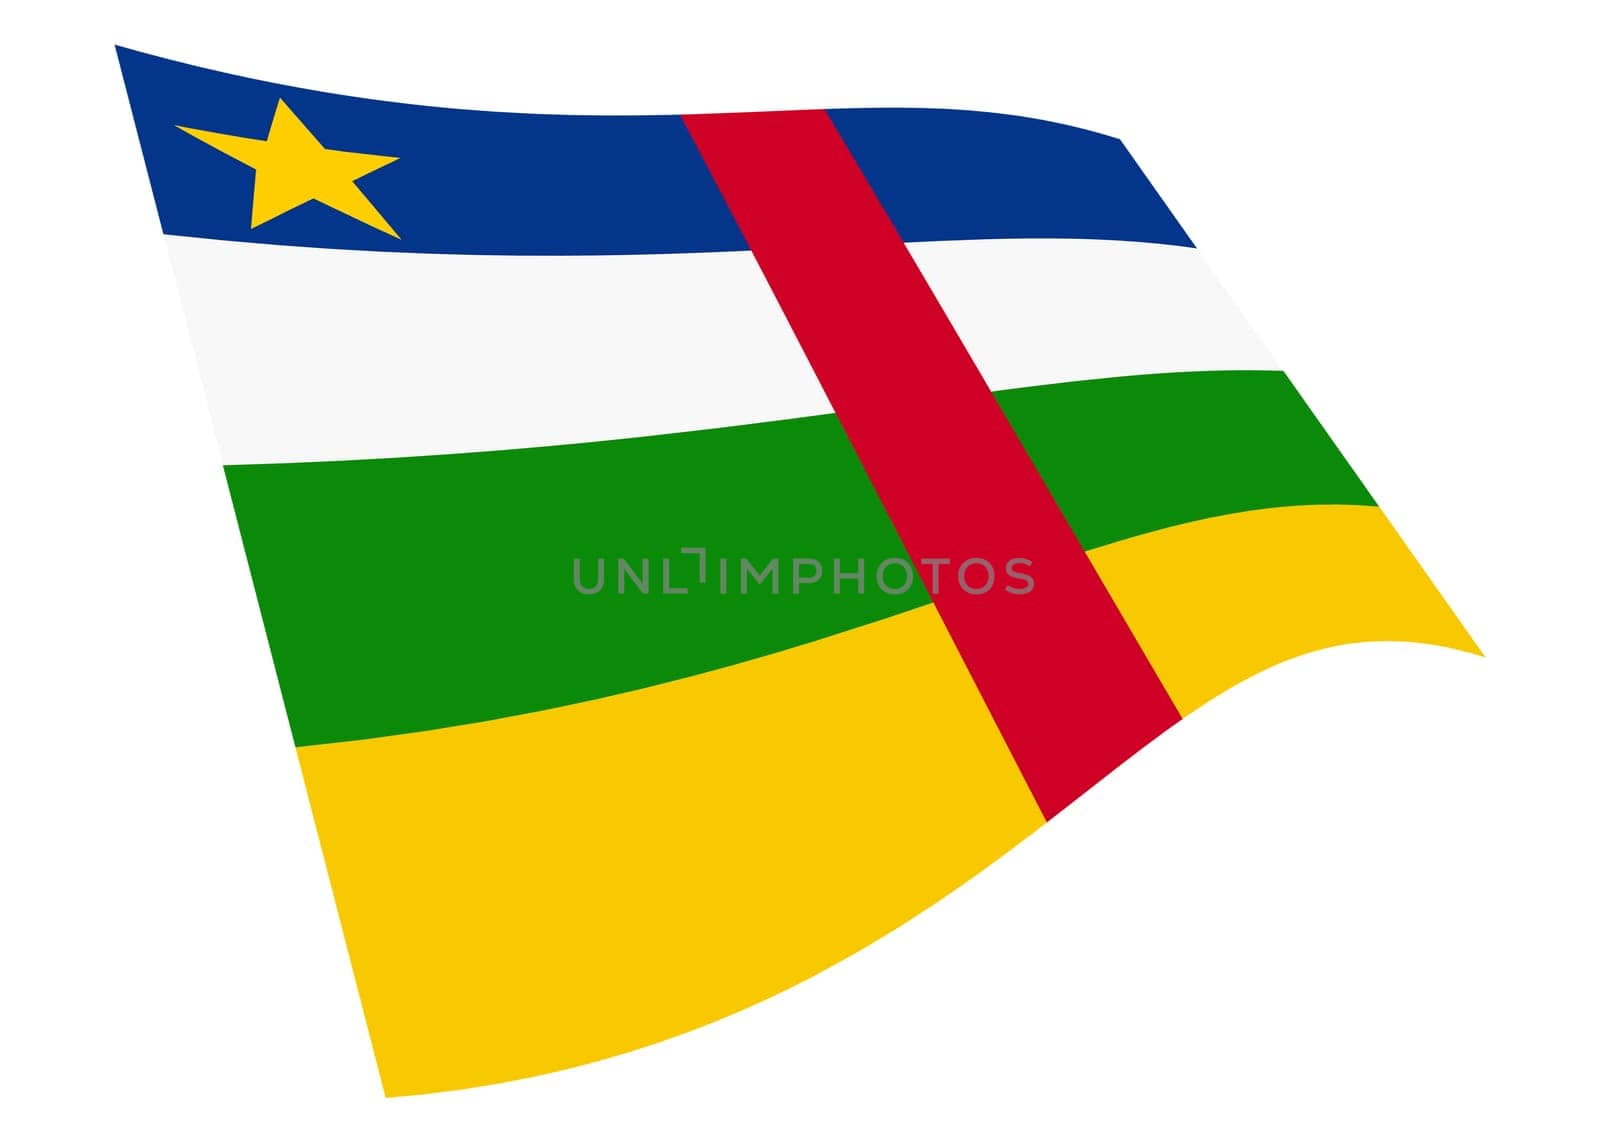 A Central African Republic waving flag graphic by VivacityImages